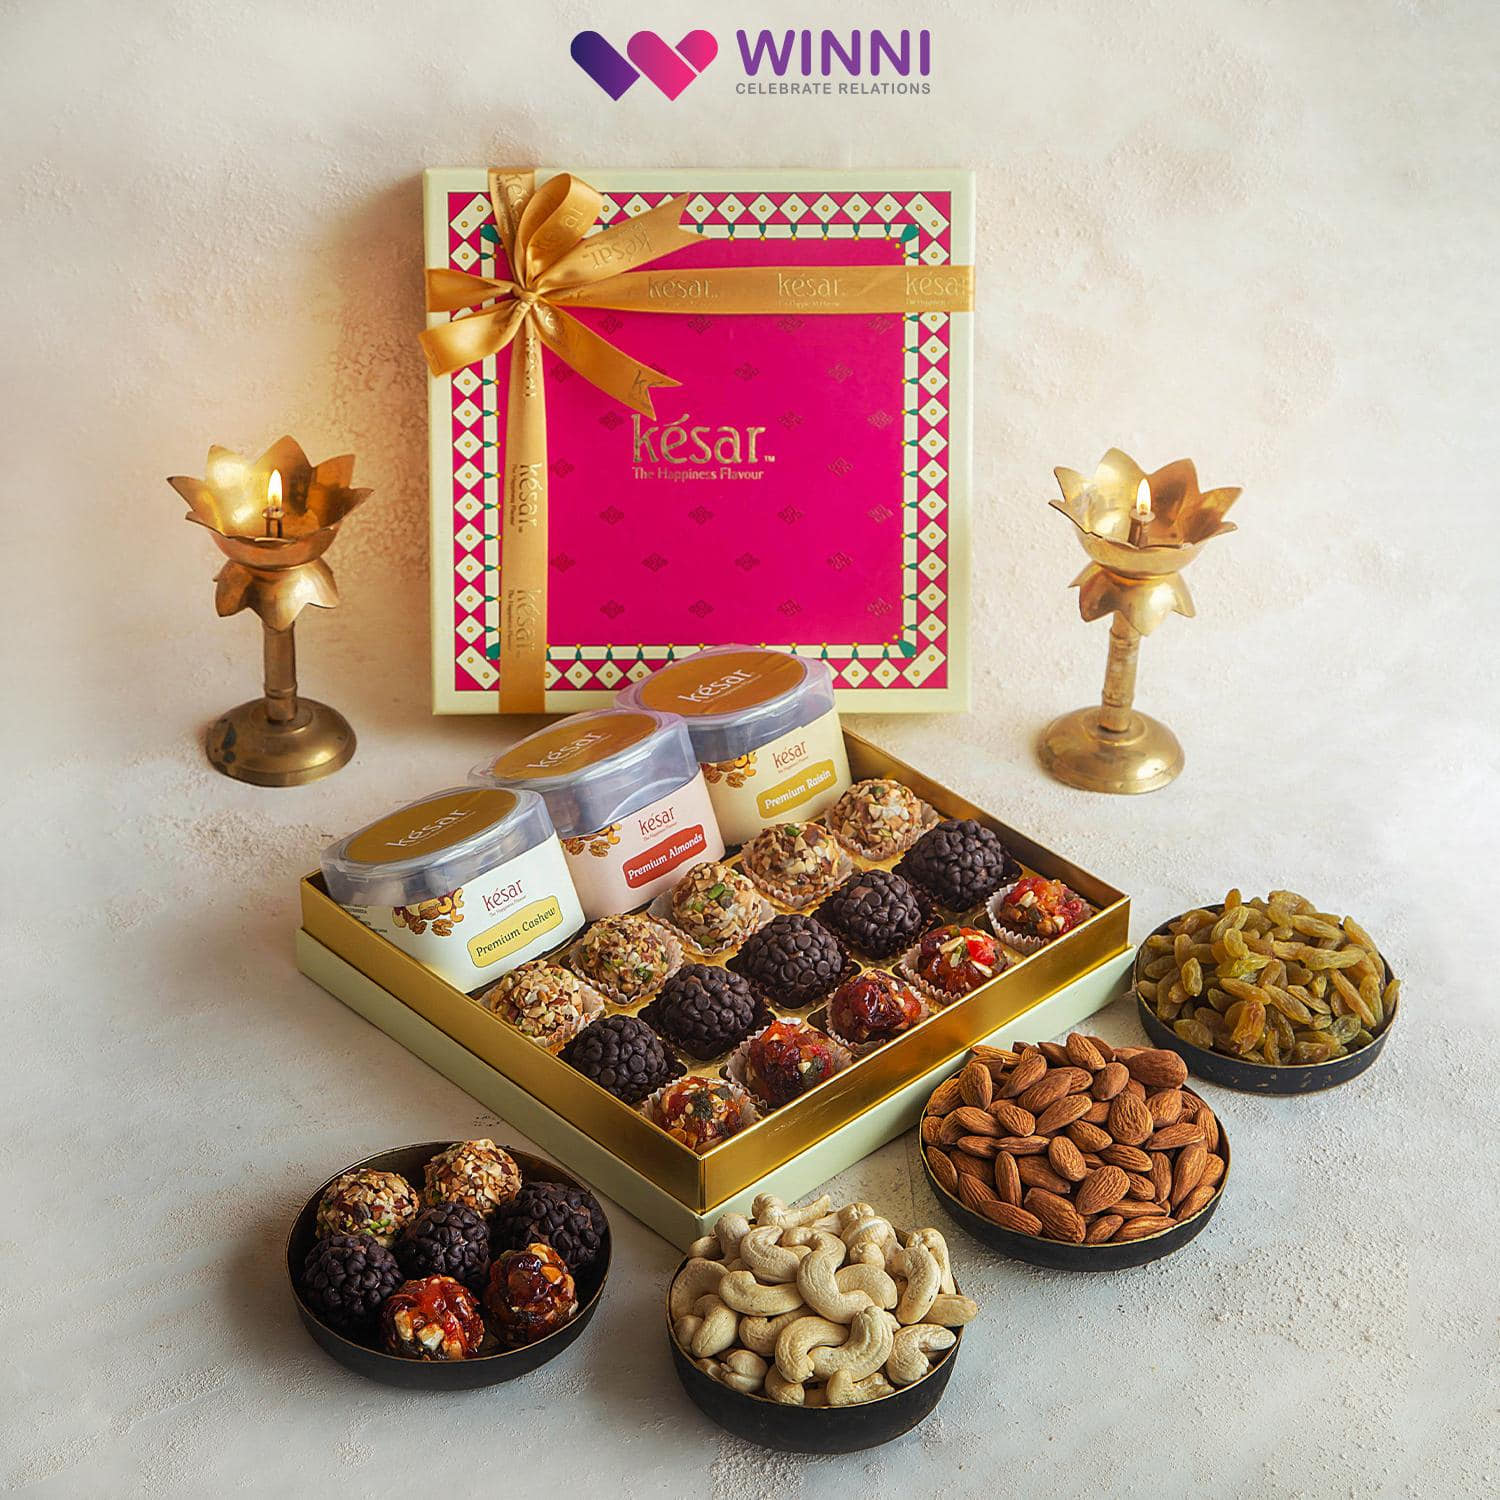 Buy MANTOUSS Diwali dry fruits gift box/Diwali gifts/Diwali gift for  friends and family/-Decorated Basket+2 Jars of Dry Fruits(Almond and  Cashew)+Showpiece figurine+2 beautiful diya+4 Rangoli Colours+Diwali Card  Online at Best Prices in India -